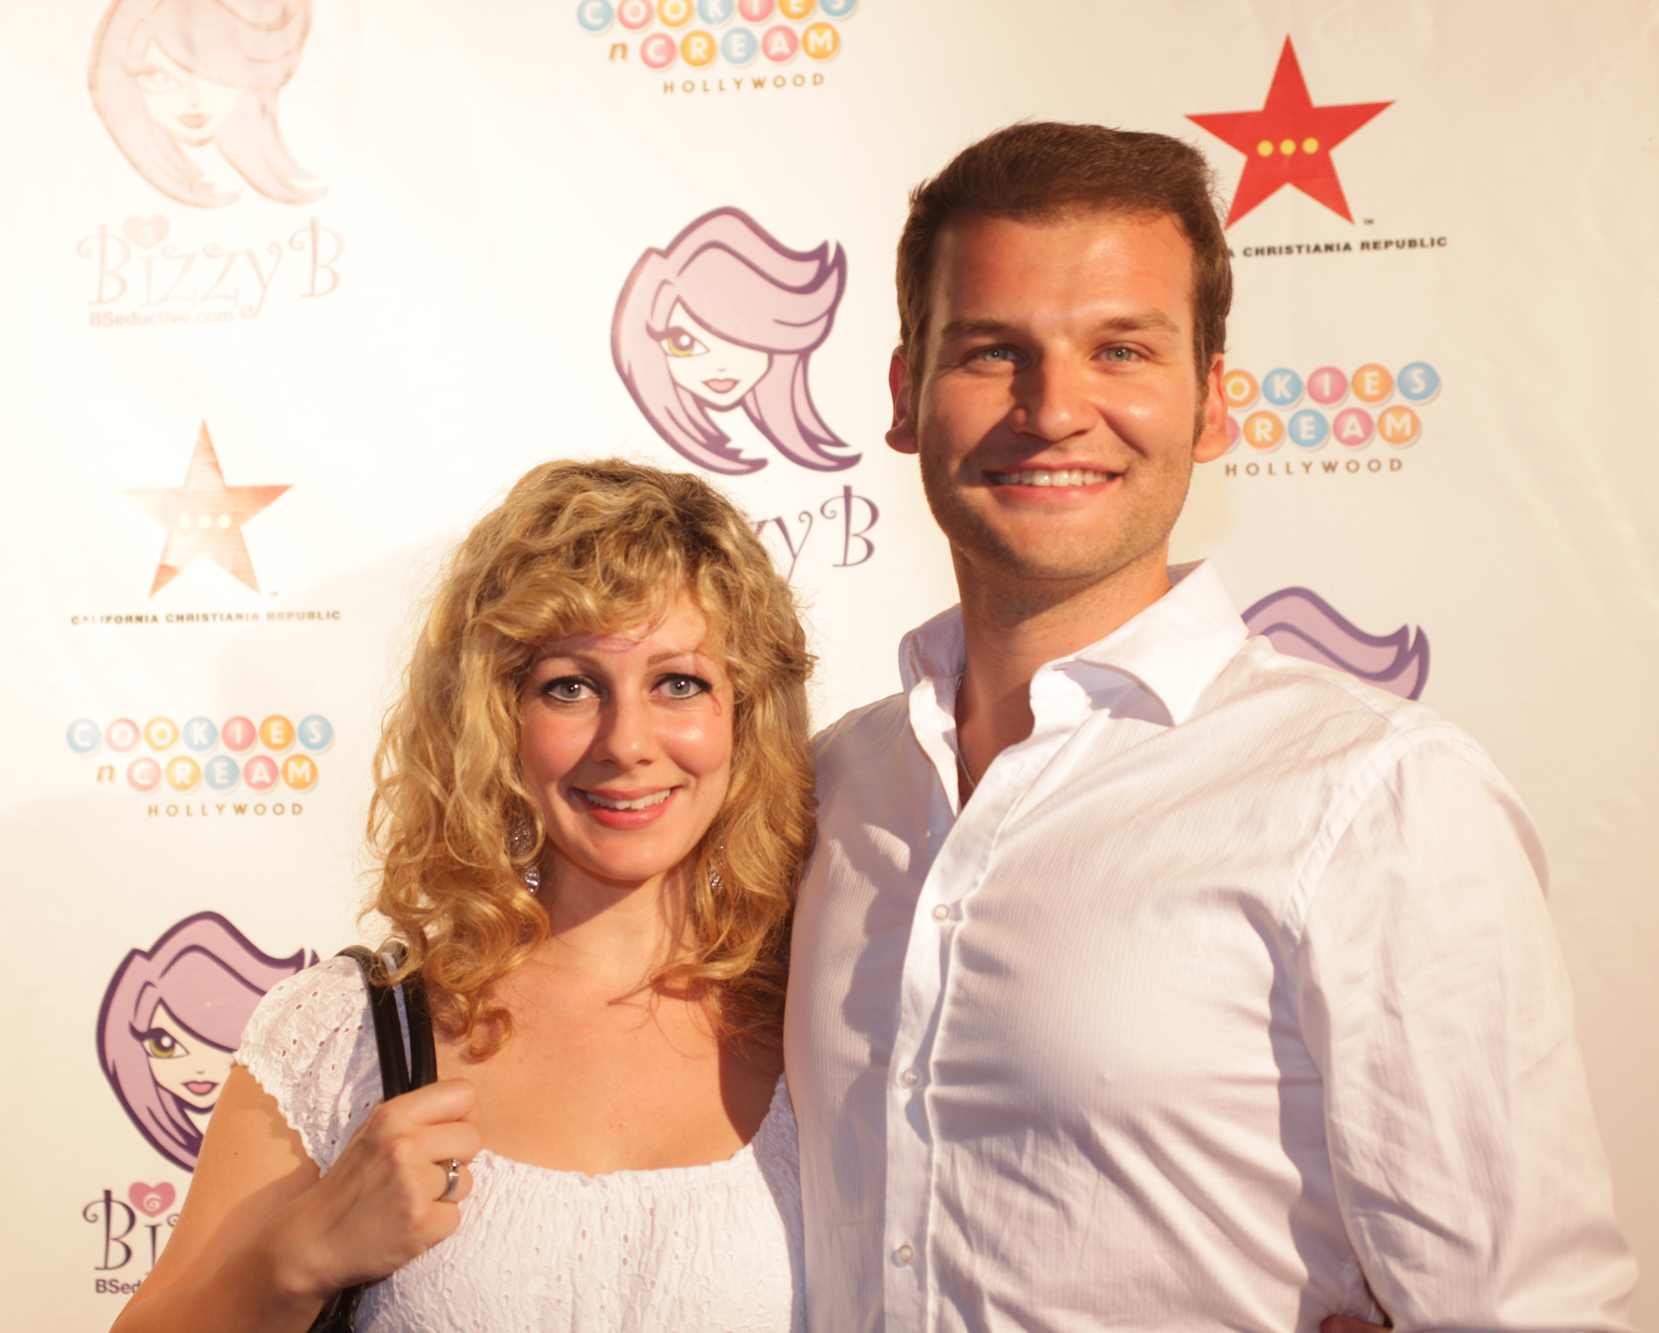 Christian Magdu with screenwriter Christin Maroun, Red Carpet Event for Beatrice Prochazka at Geisha House in Hollywood Sept 2011